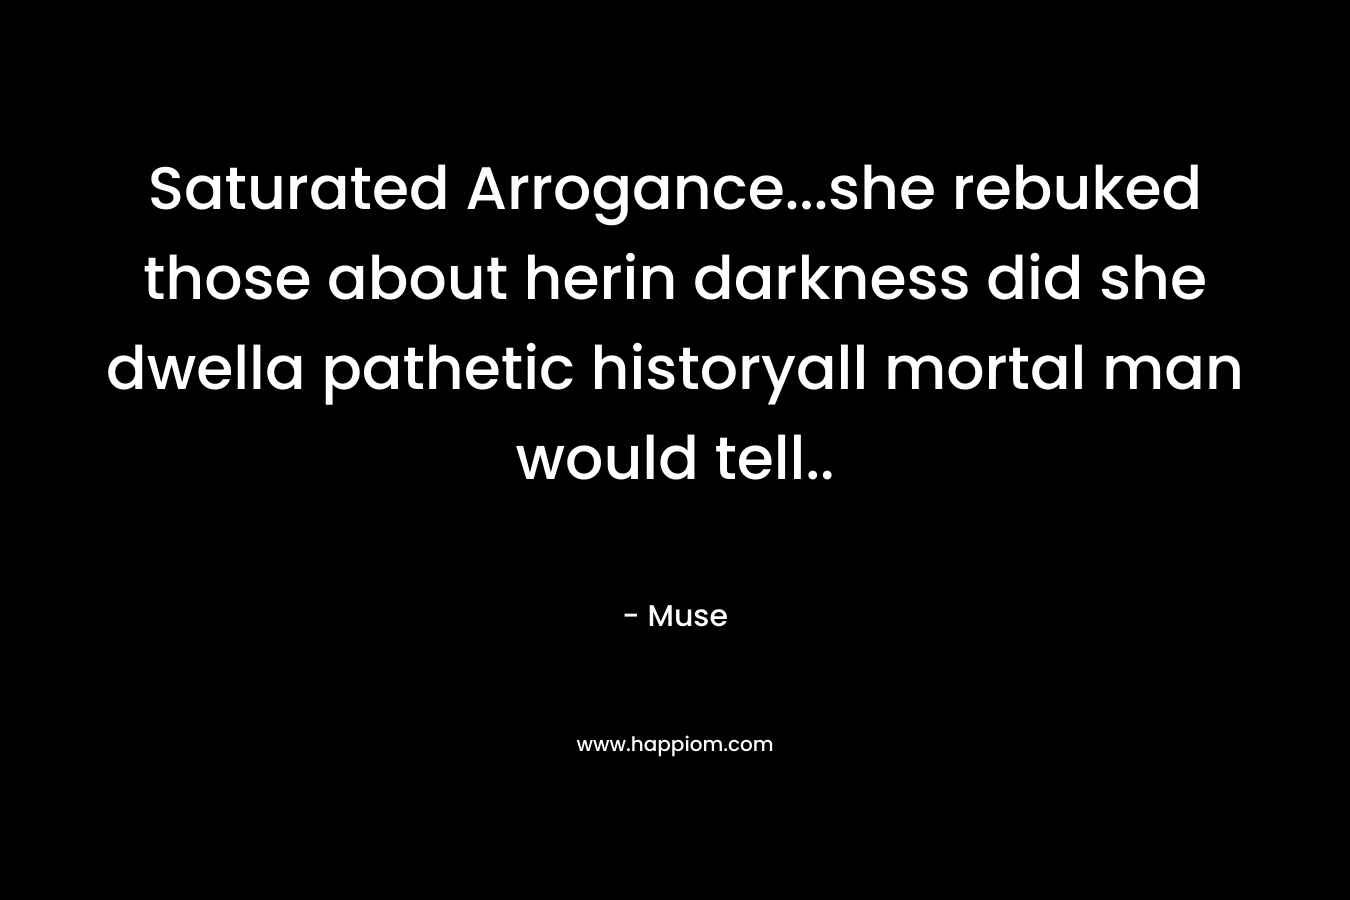 Saturated Arrogance...she rebuked those about herin darkness did she dwella pathetic historyall mortal man would tell..